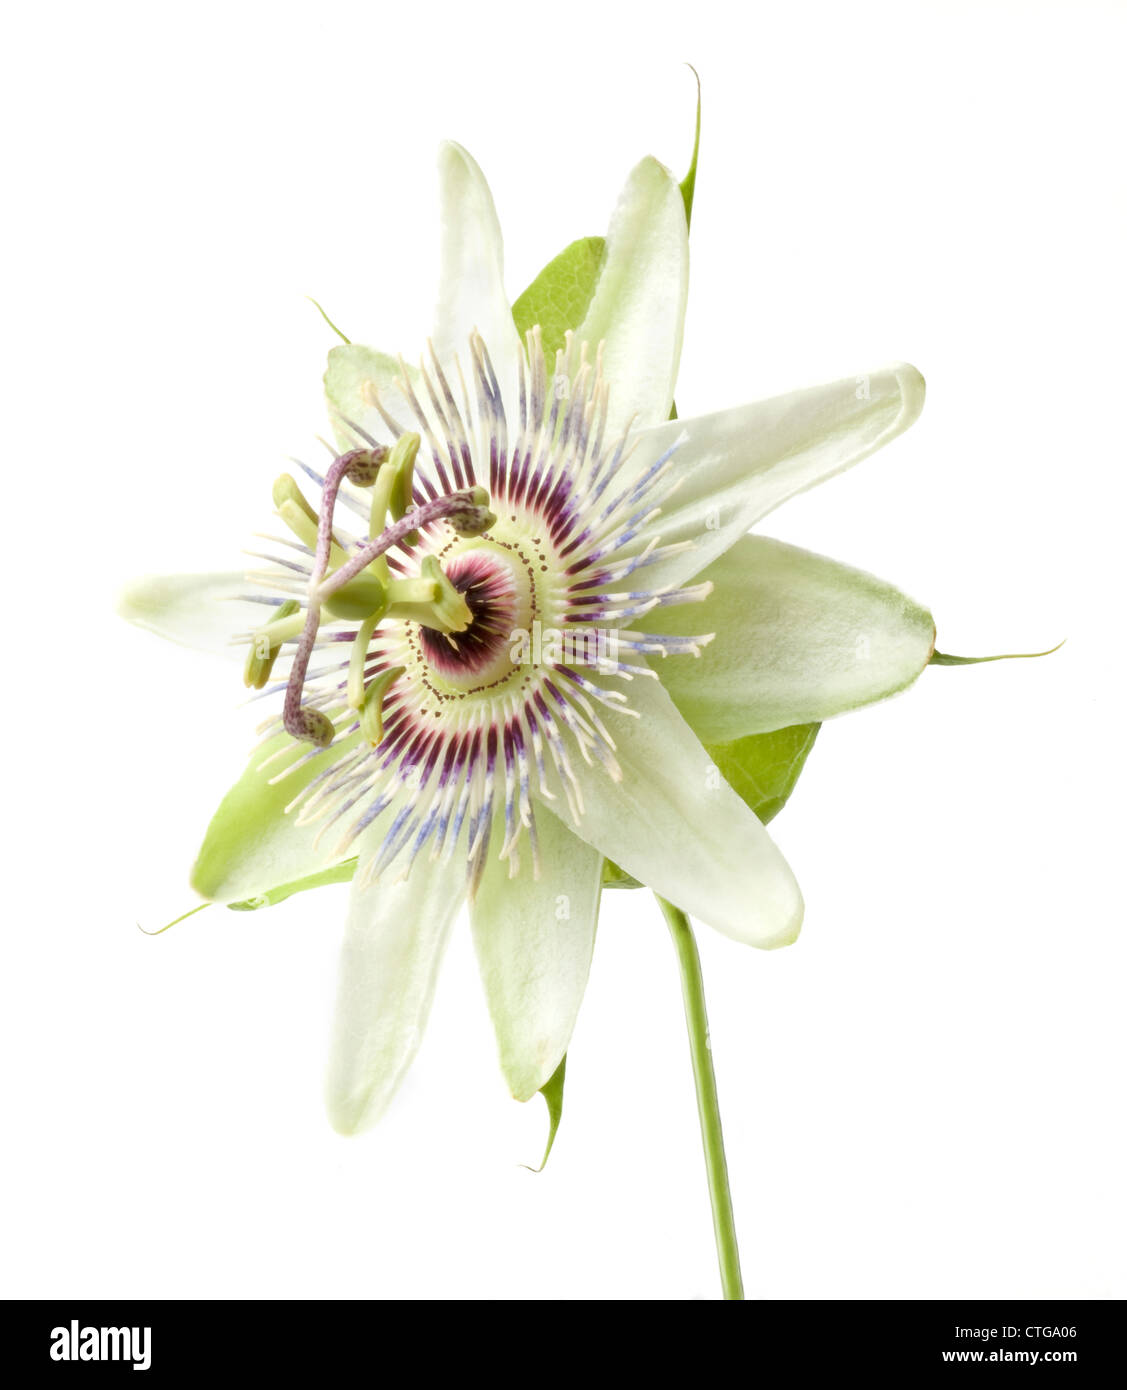 Passiflora caerulea, Passion flower, single white and purple flower against a white background. Stock Photo